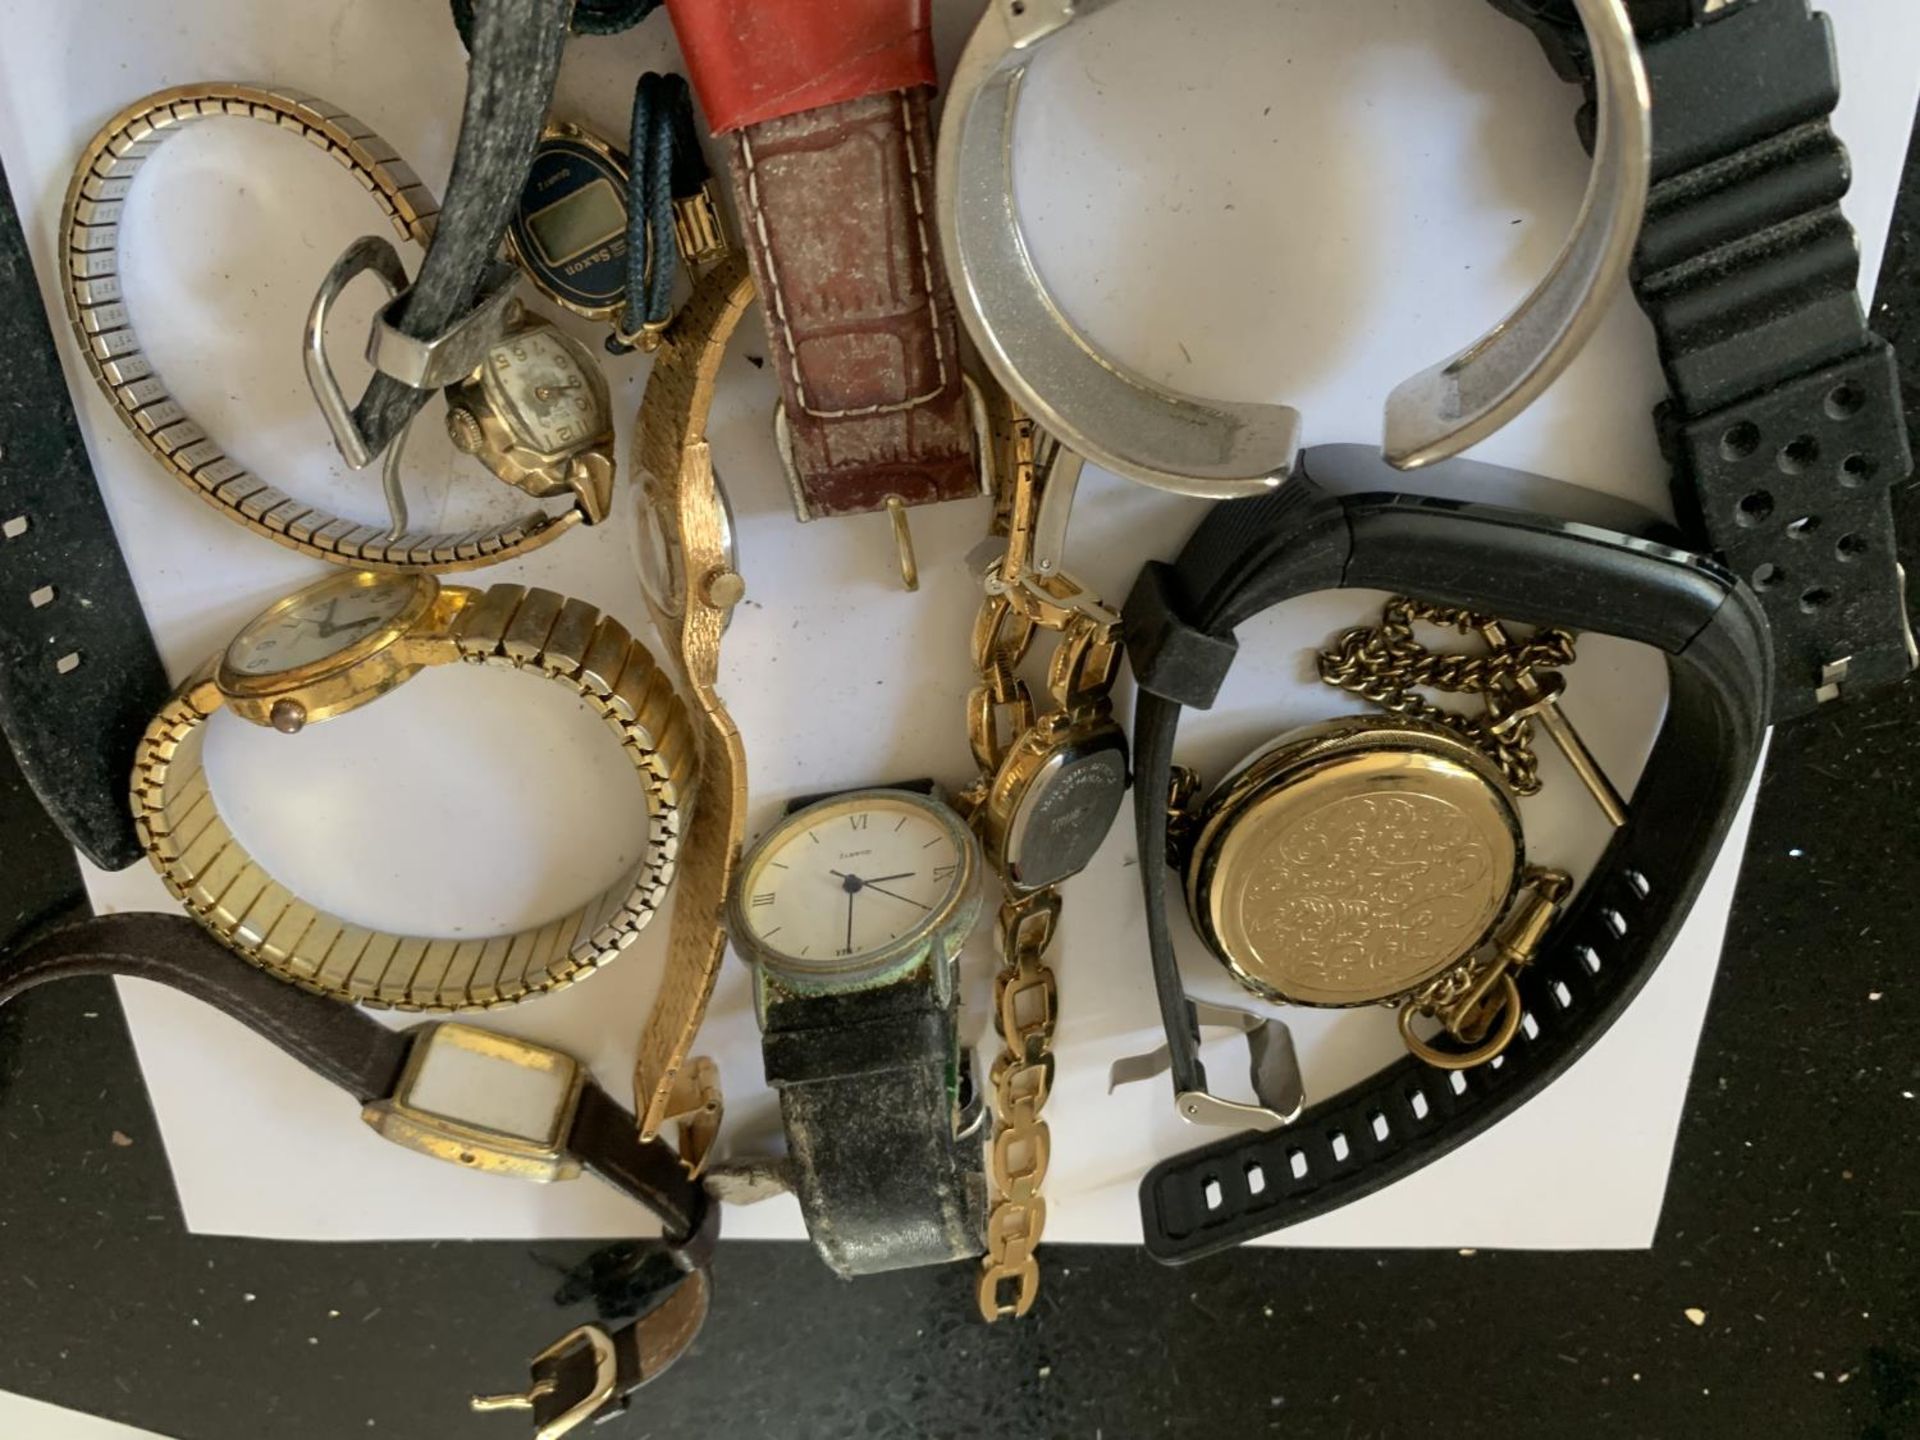 A LARGE COLLECTION OF WATCHES AND WATCH PARTS - Image 2 of 4